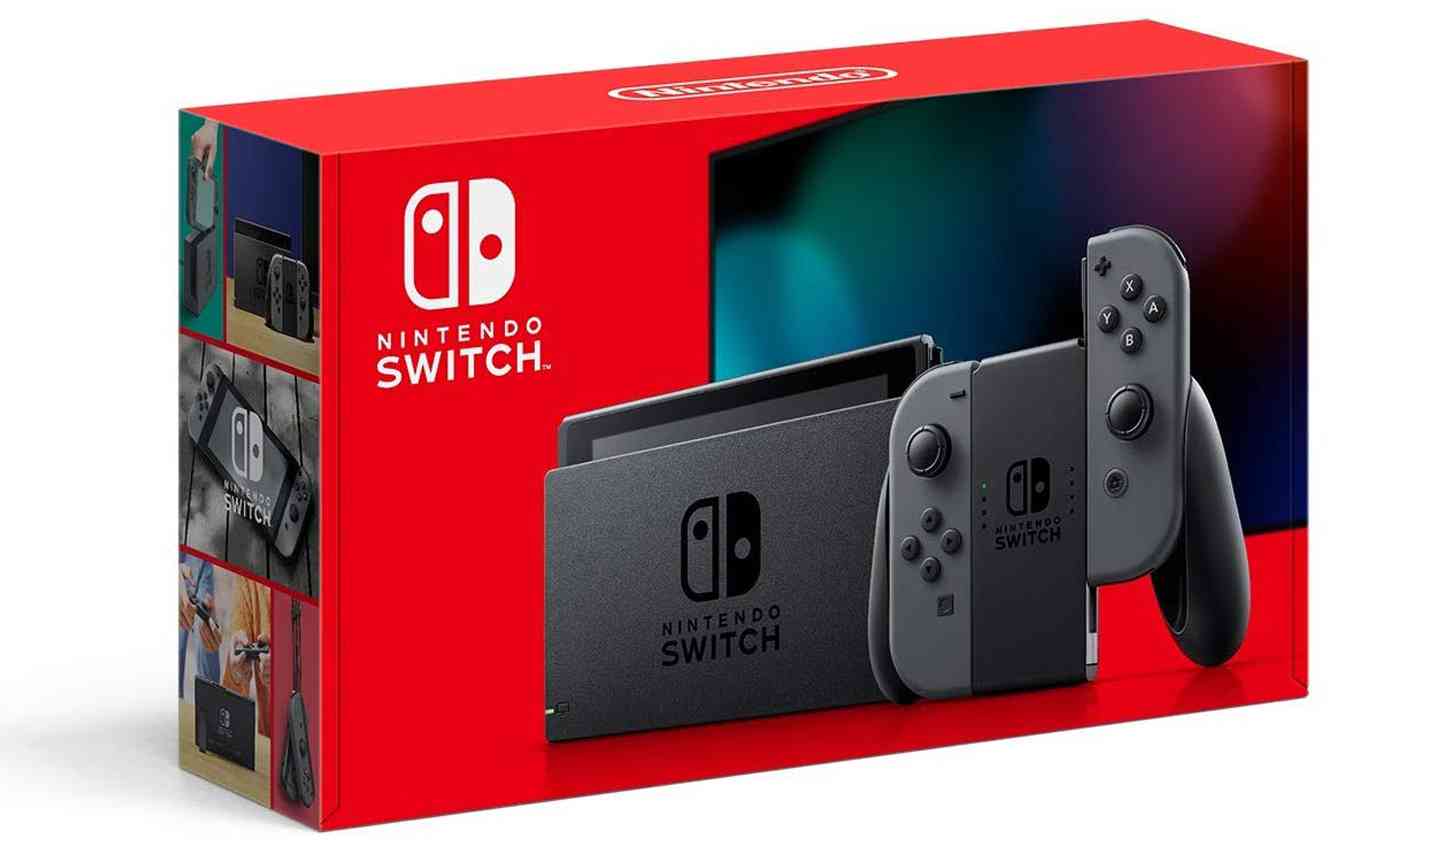 New Nintendo Switch improved battery life